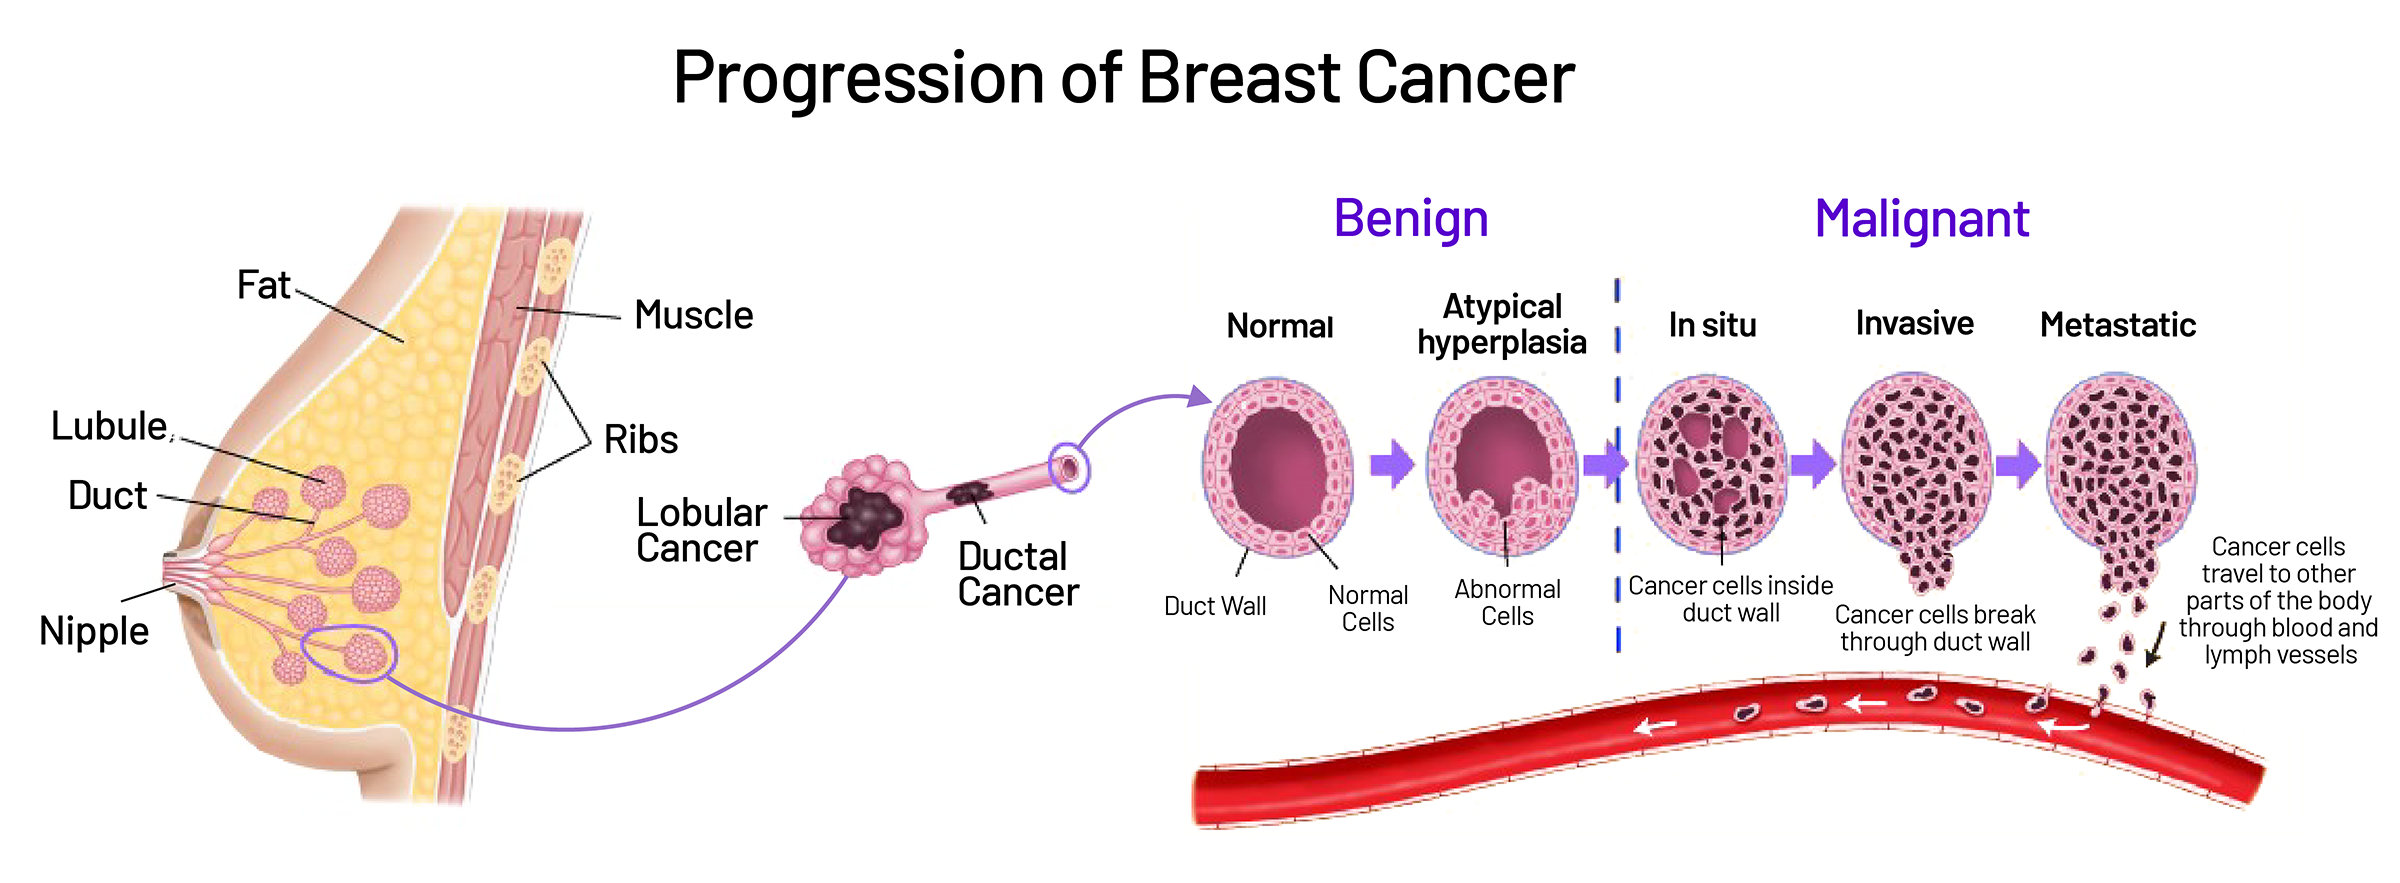 Breast Cancer and its types 